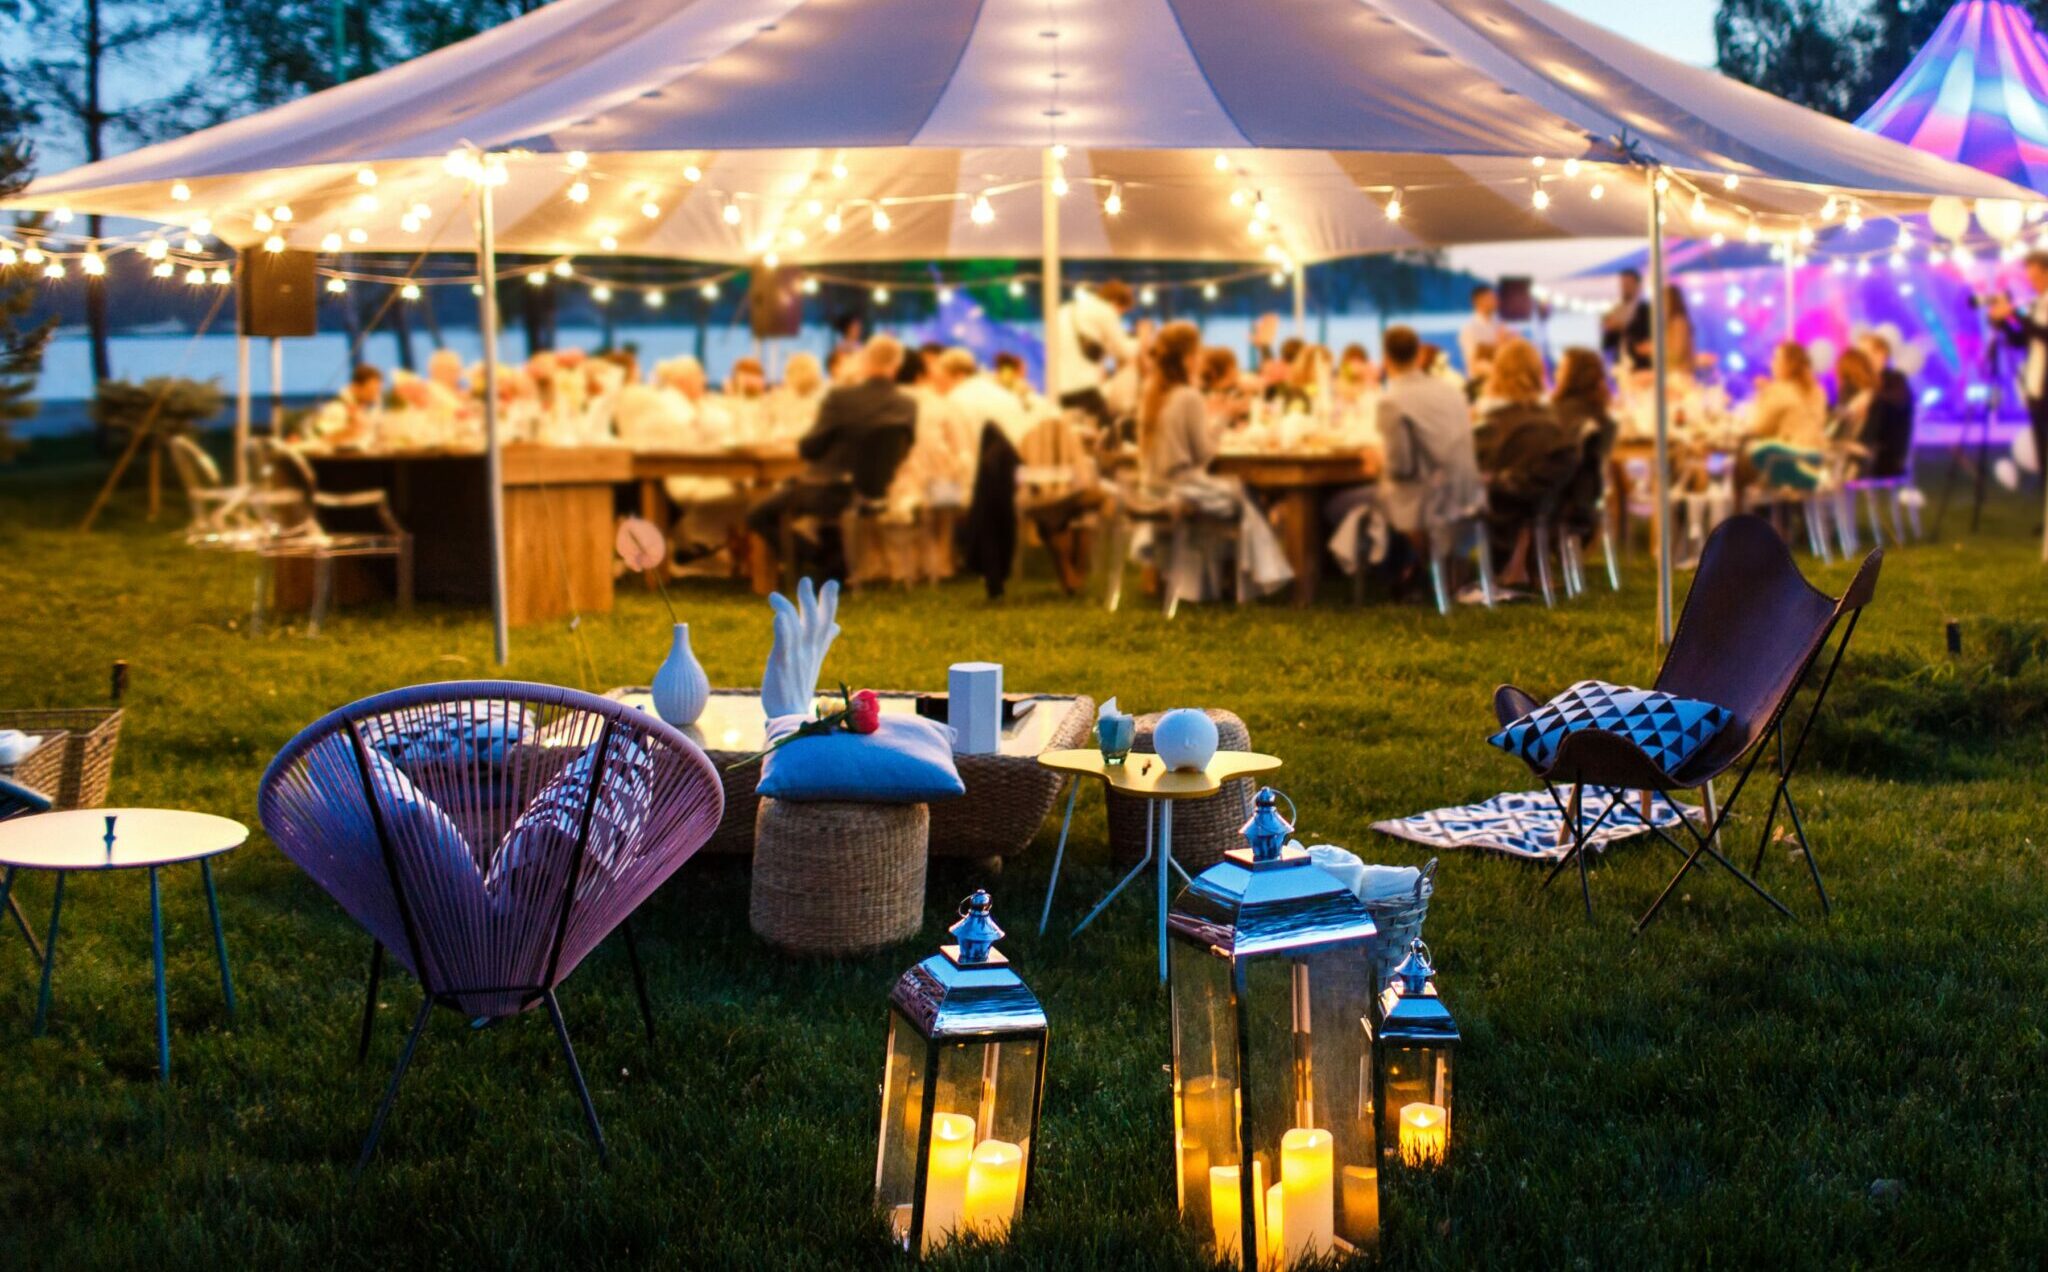 Image of furniture and decoration from event with marquee rental in the background